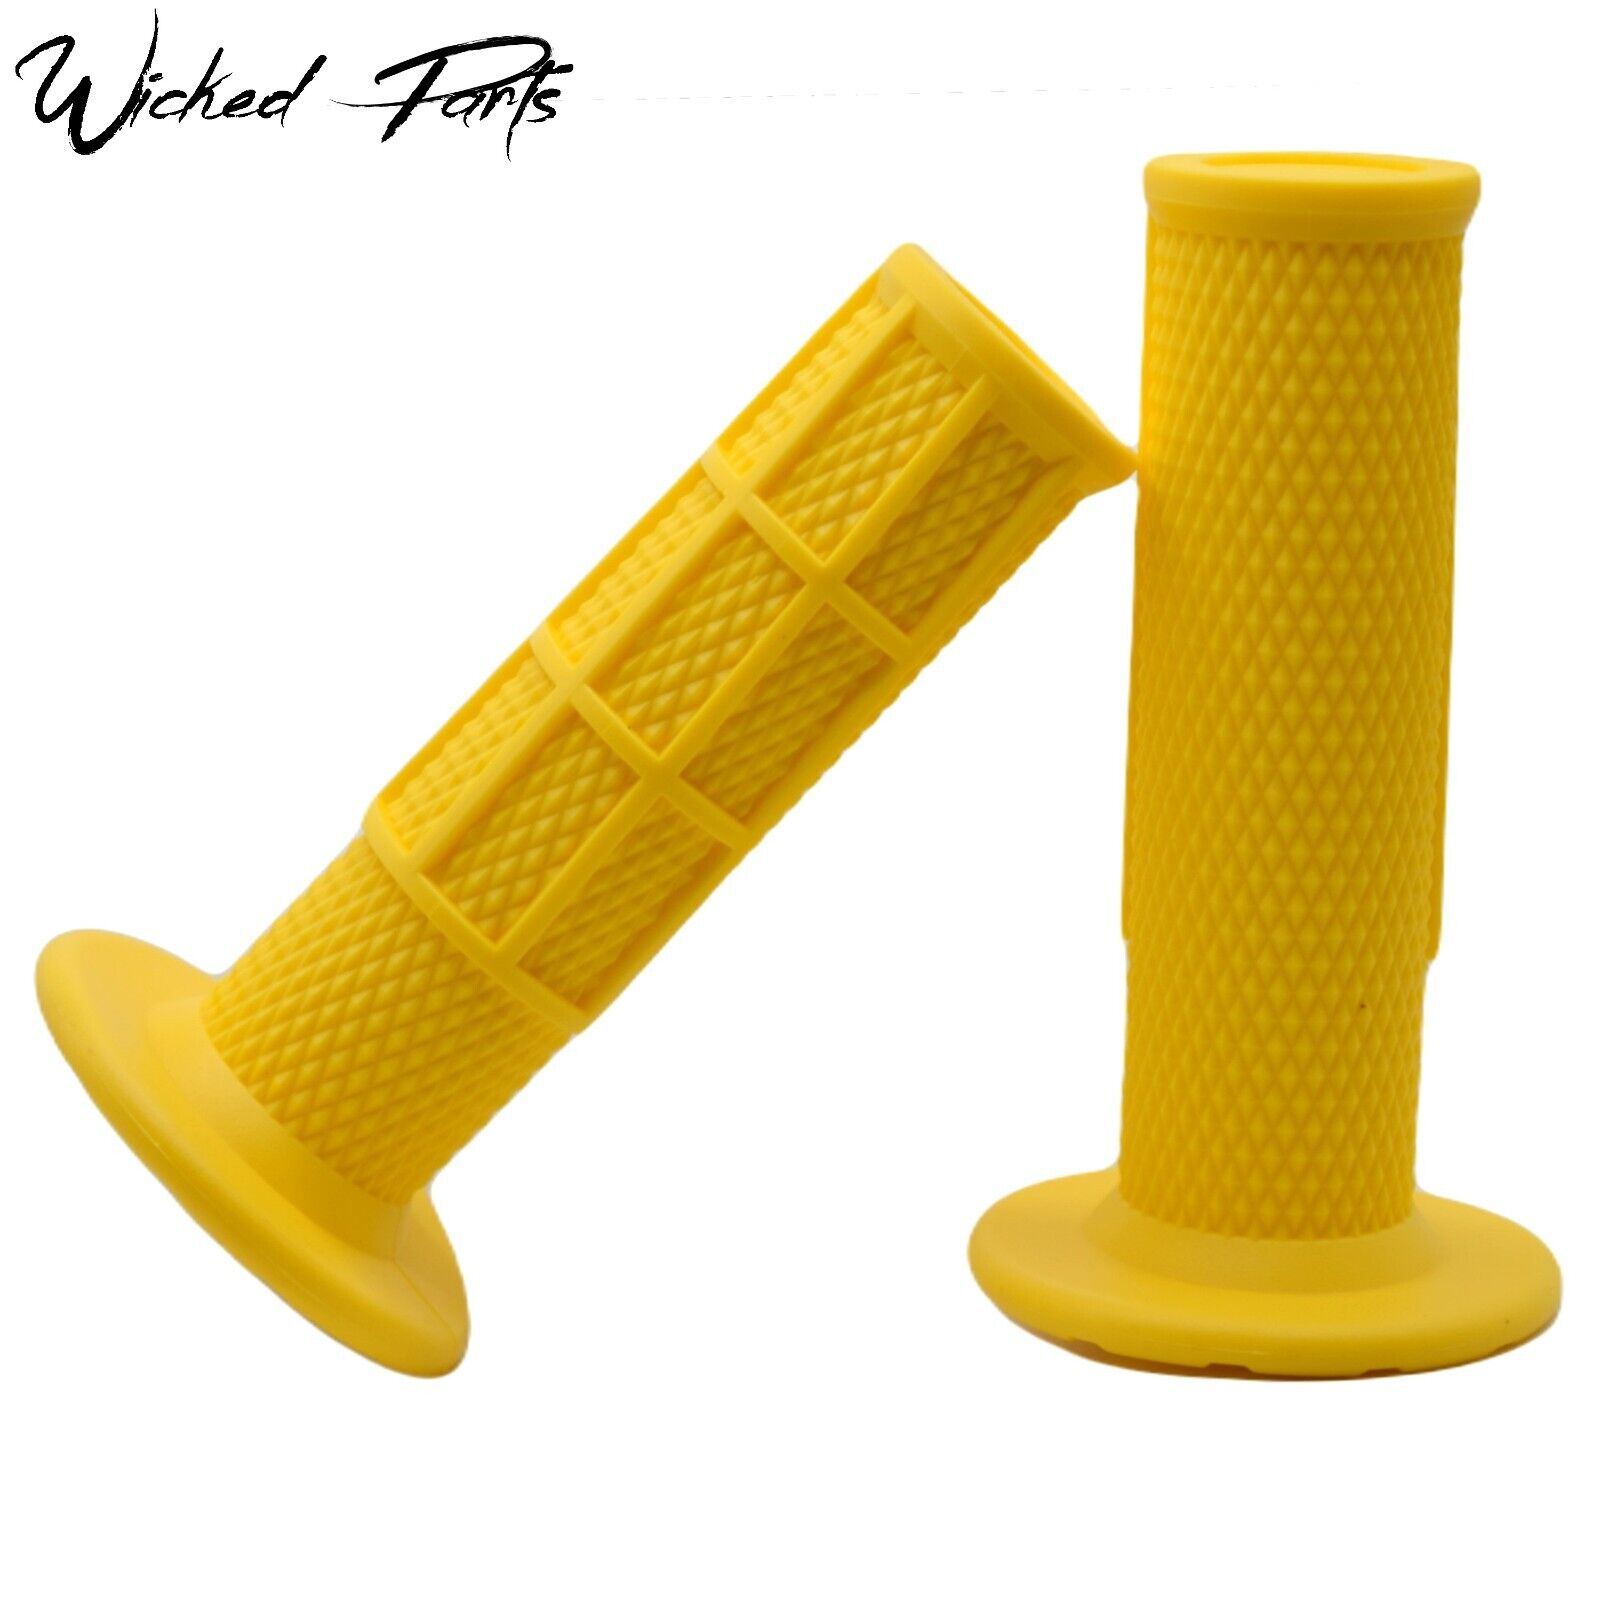 (8 Colors) Half Waffle - Soft Compound - Dirt Bike Motorcycle Grips 7/8\